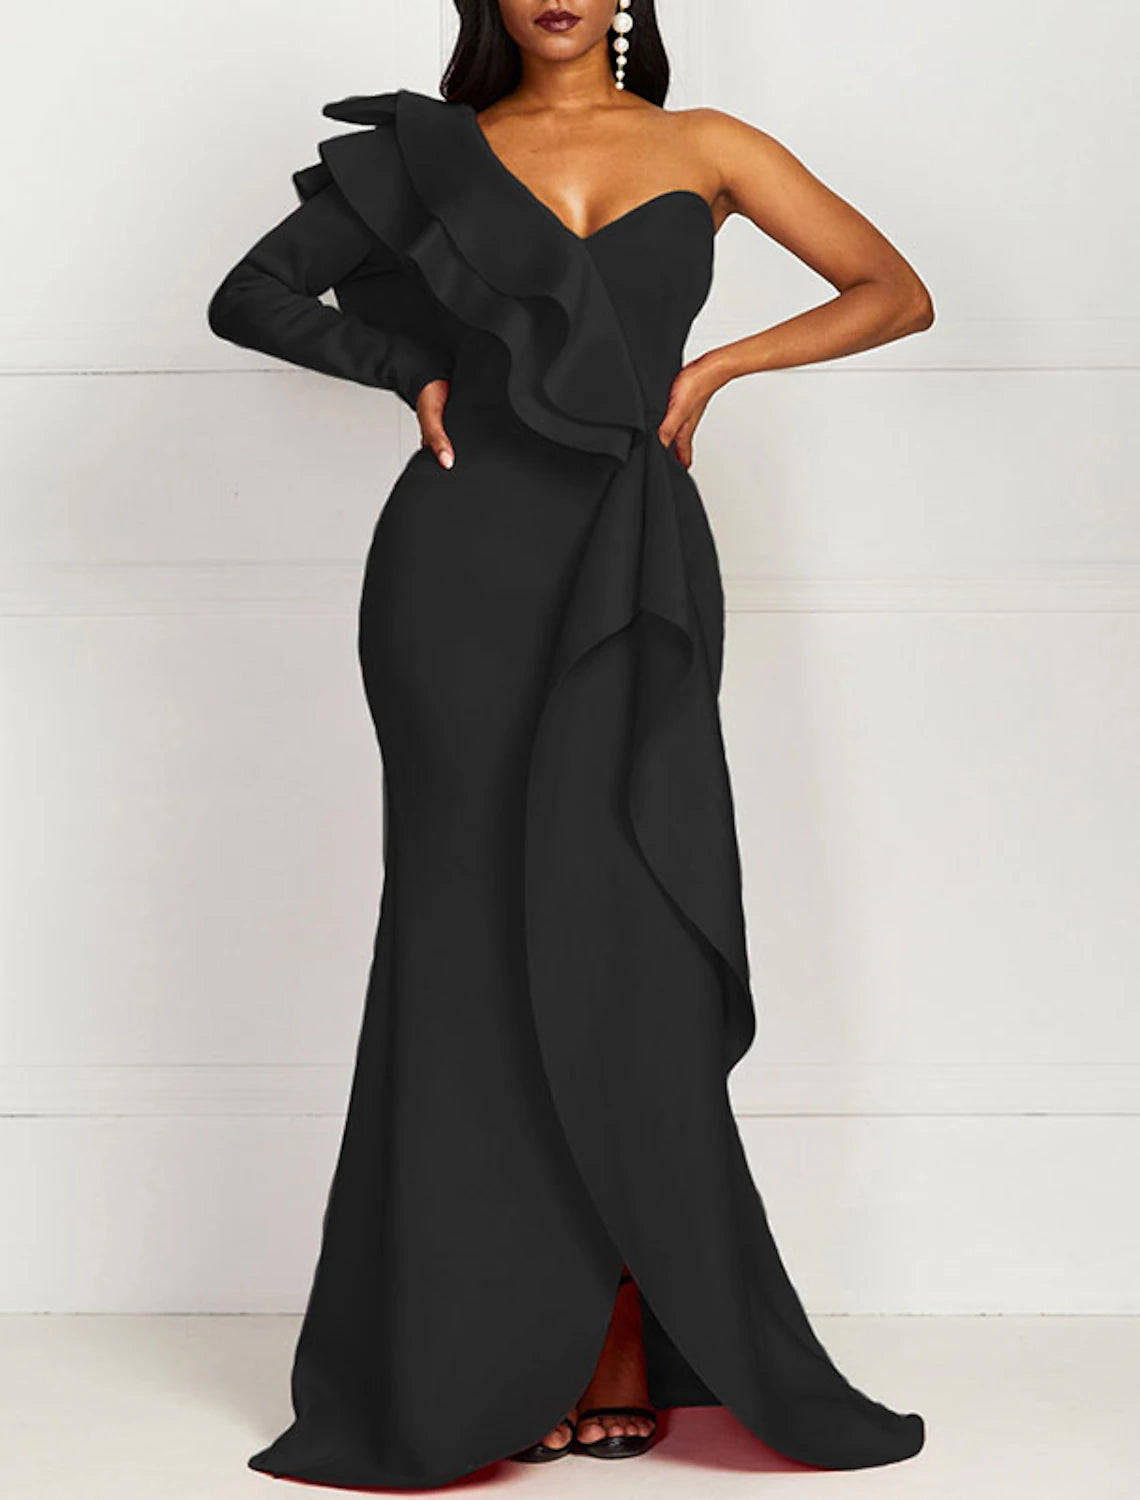 Mermaid Black Dress Plus Size Evening Gown Minimalist Dress Formal Evening Floor Length Long Sleeve One Shoulder Fall Wedding Guest Stretch Fabric with Ruffles Pure Color